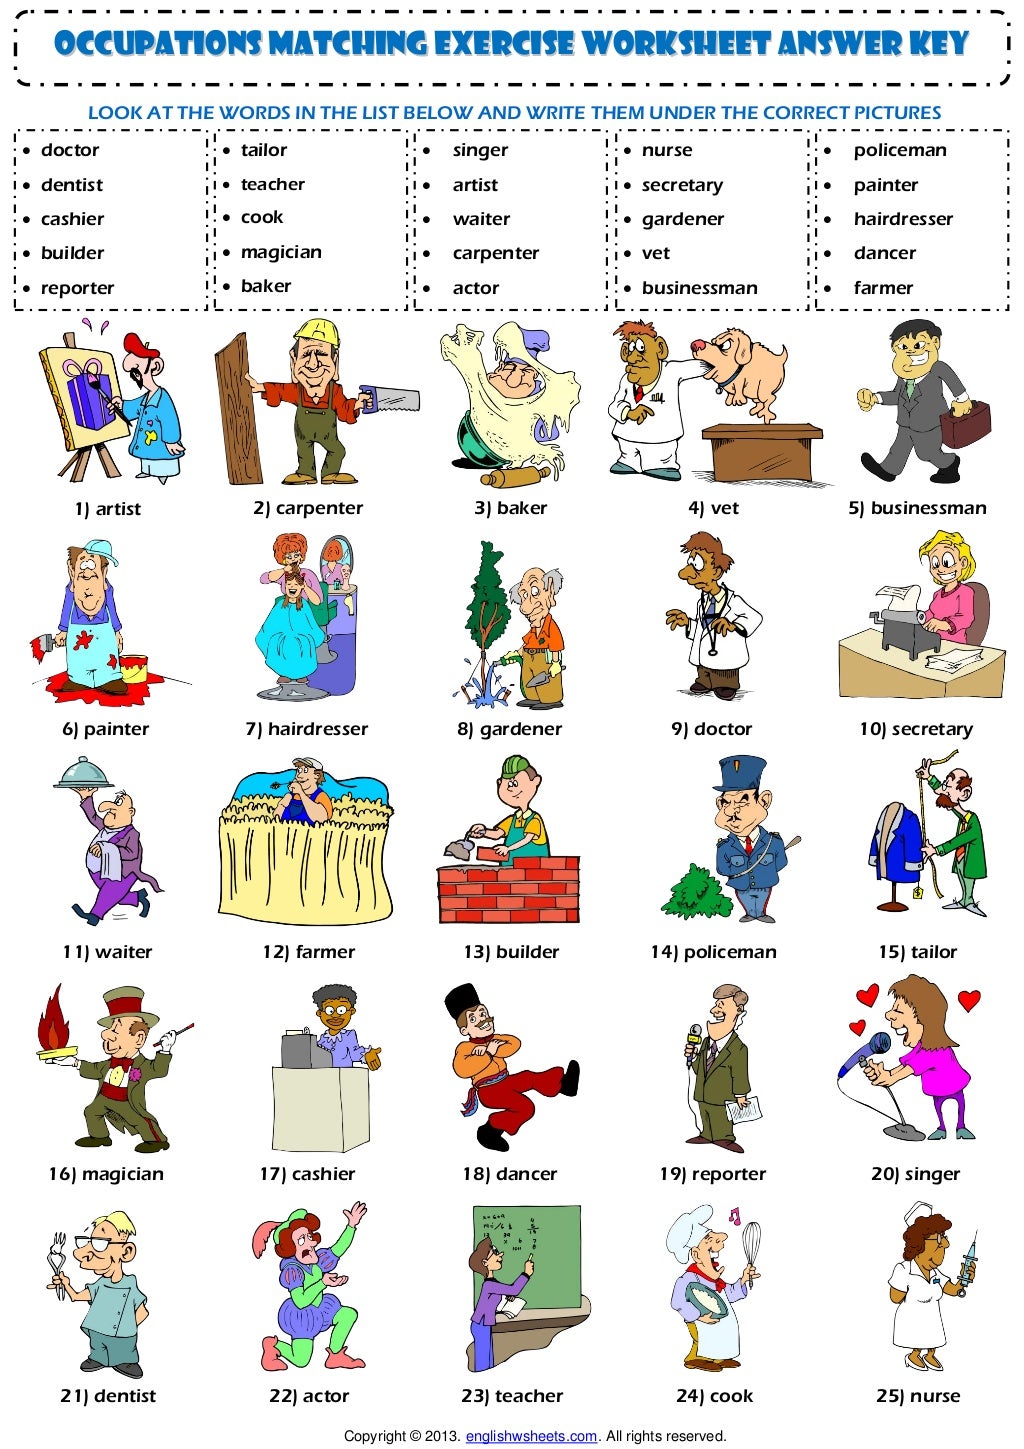 jobs-occupations-professions-vocabulary-matching-exercise-worksheet